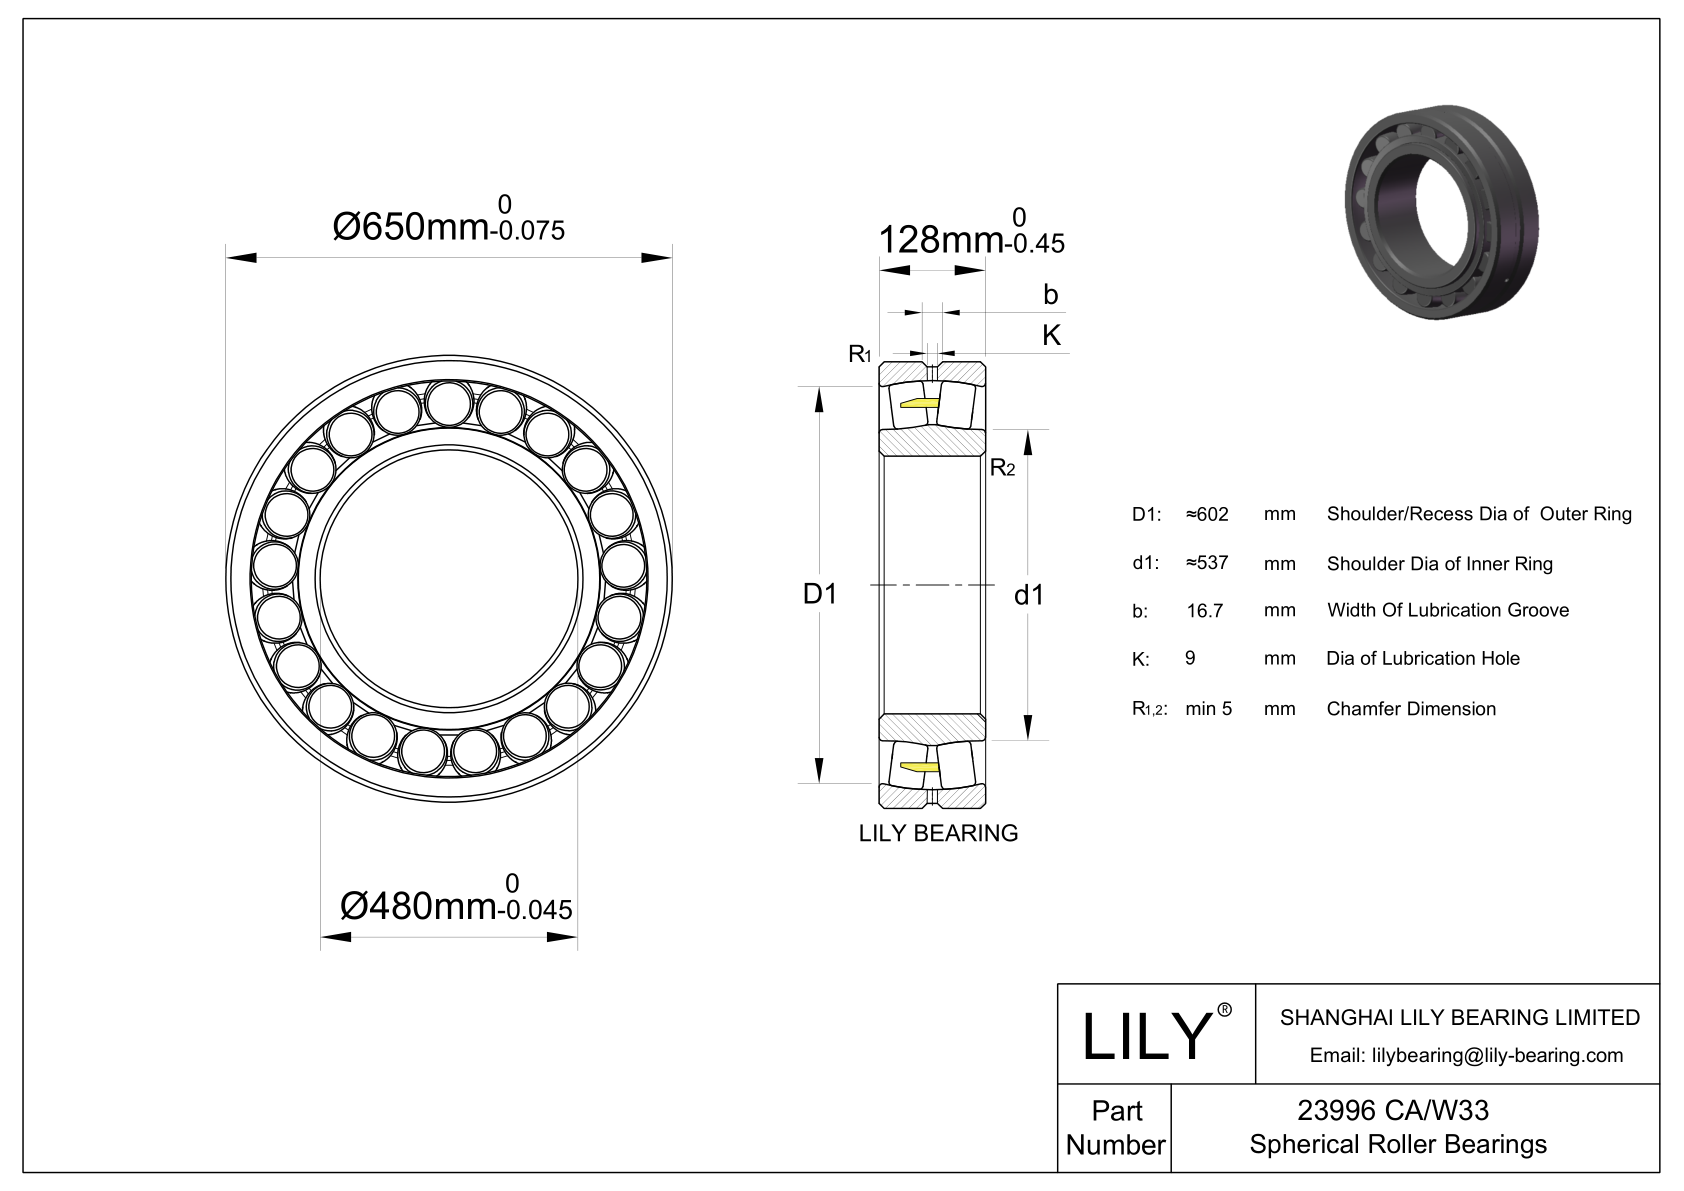 23996 CA/W33 Double Row Spherical Roller Bearing cad drawing